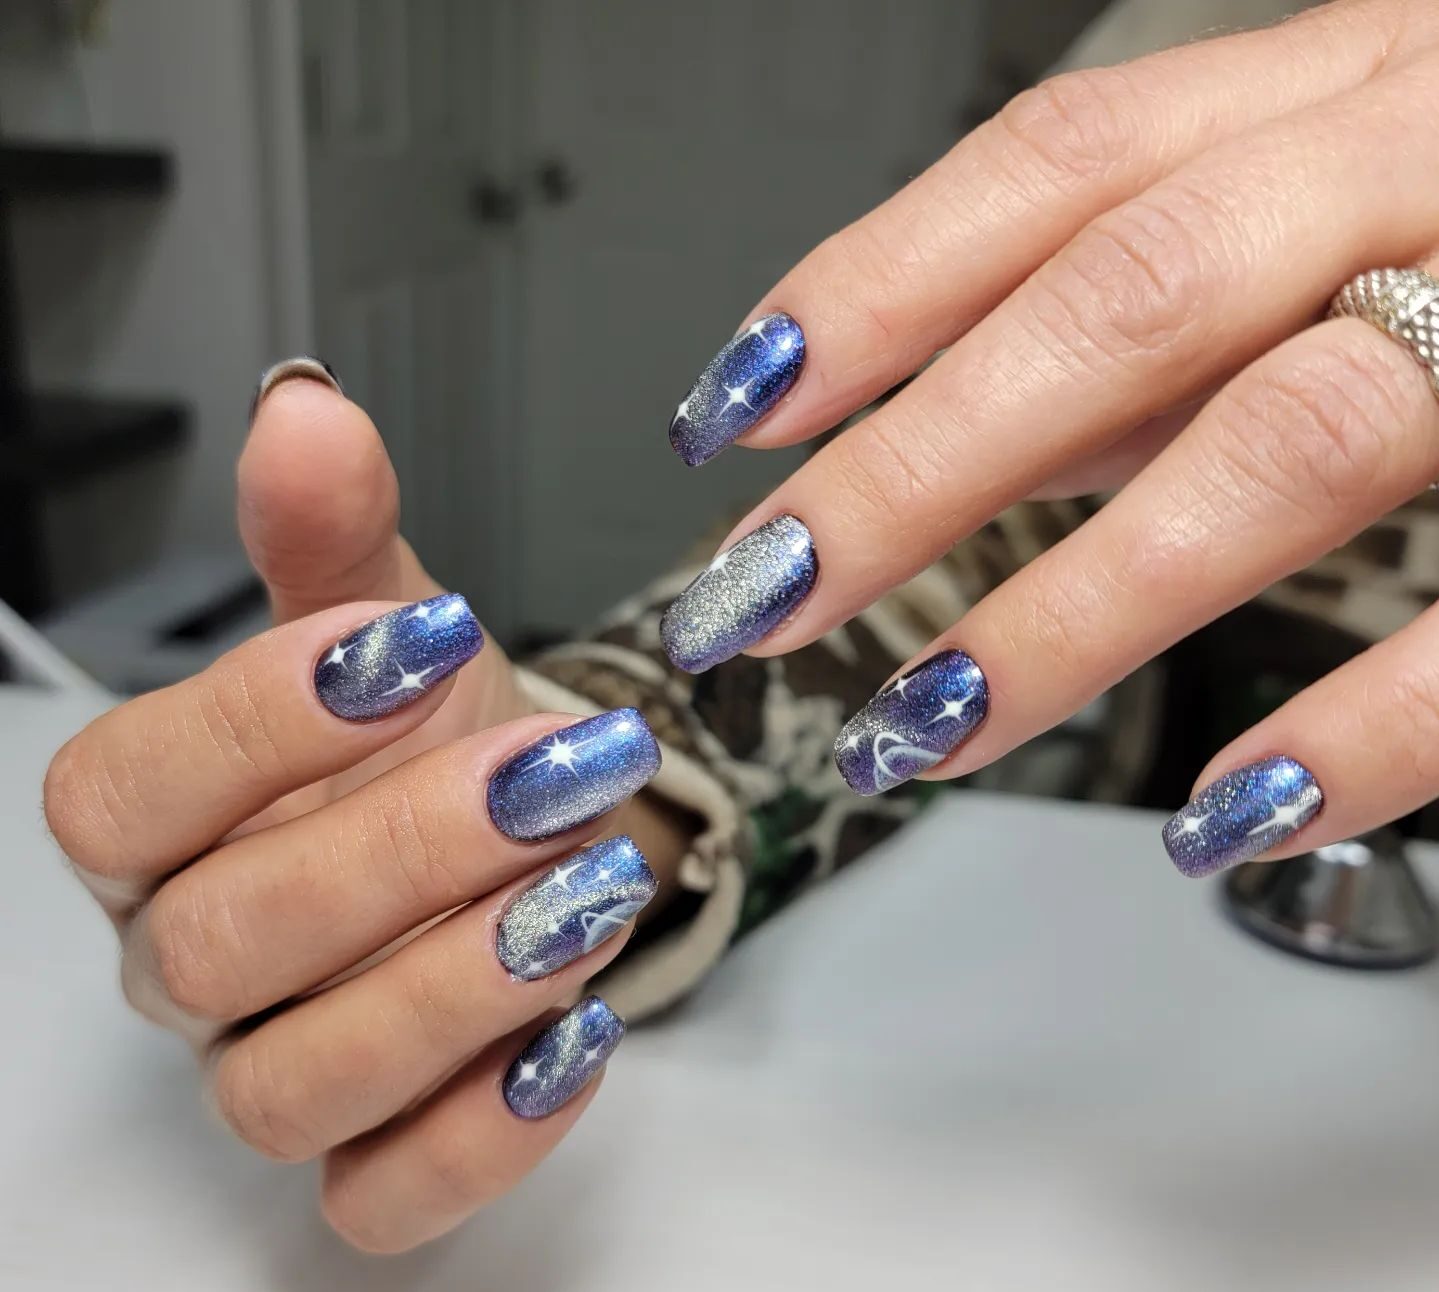 Blue nail color with shimmering galaxy-themed nail design on long tapered square nails